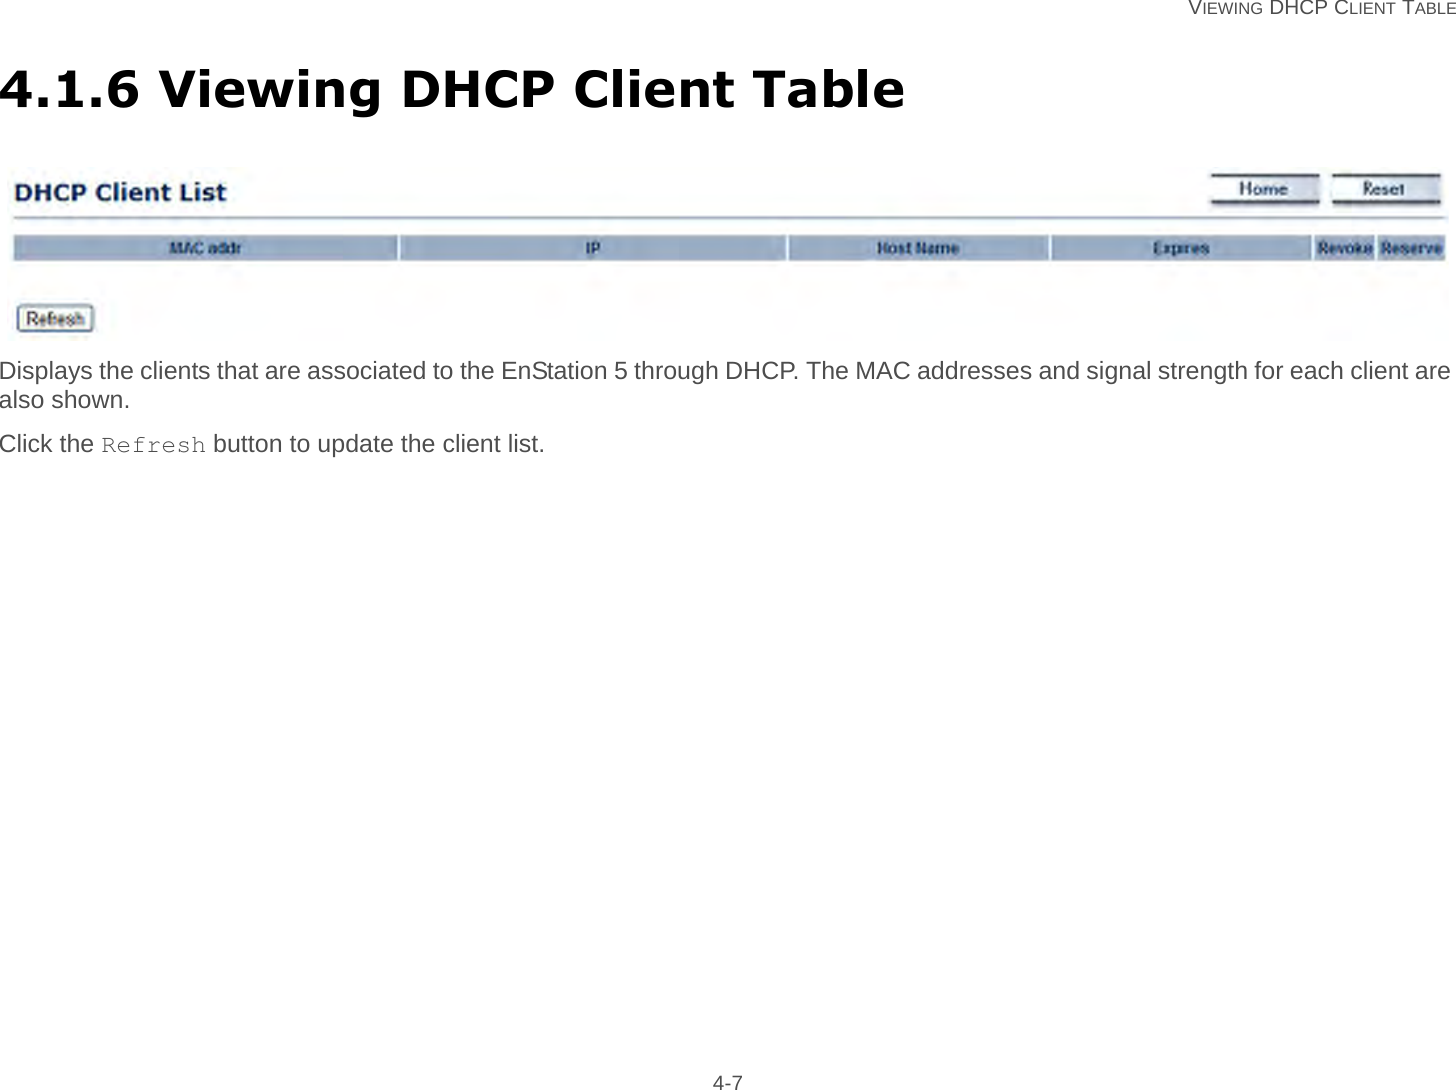   VIEWING DHCP CLIENT TABLE 4-74.1.6 Viewing DHCP Client TableDisplays the clients that are associated to the EnStation 5 through DHCP. The MAC addresses and signal strength for each client are also shown.Click the Refresh button to update the client list.